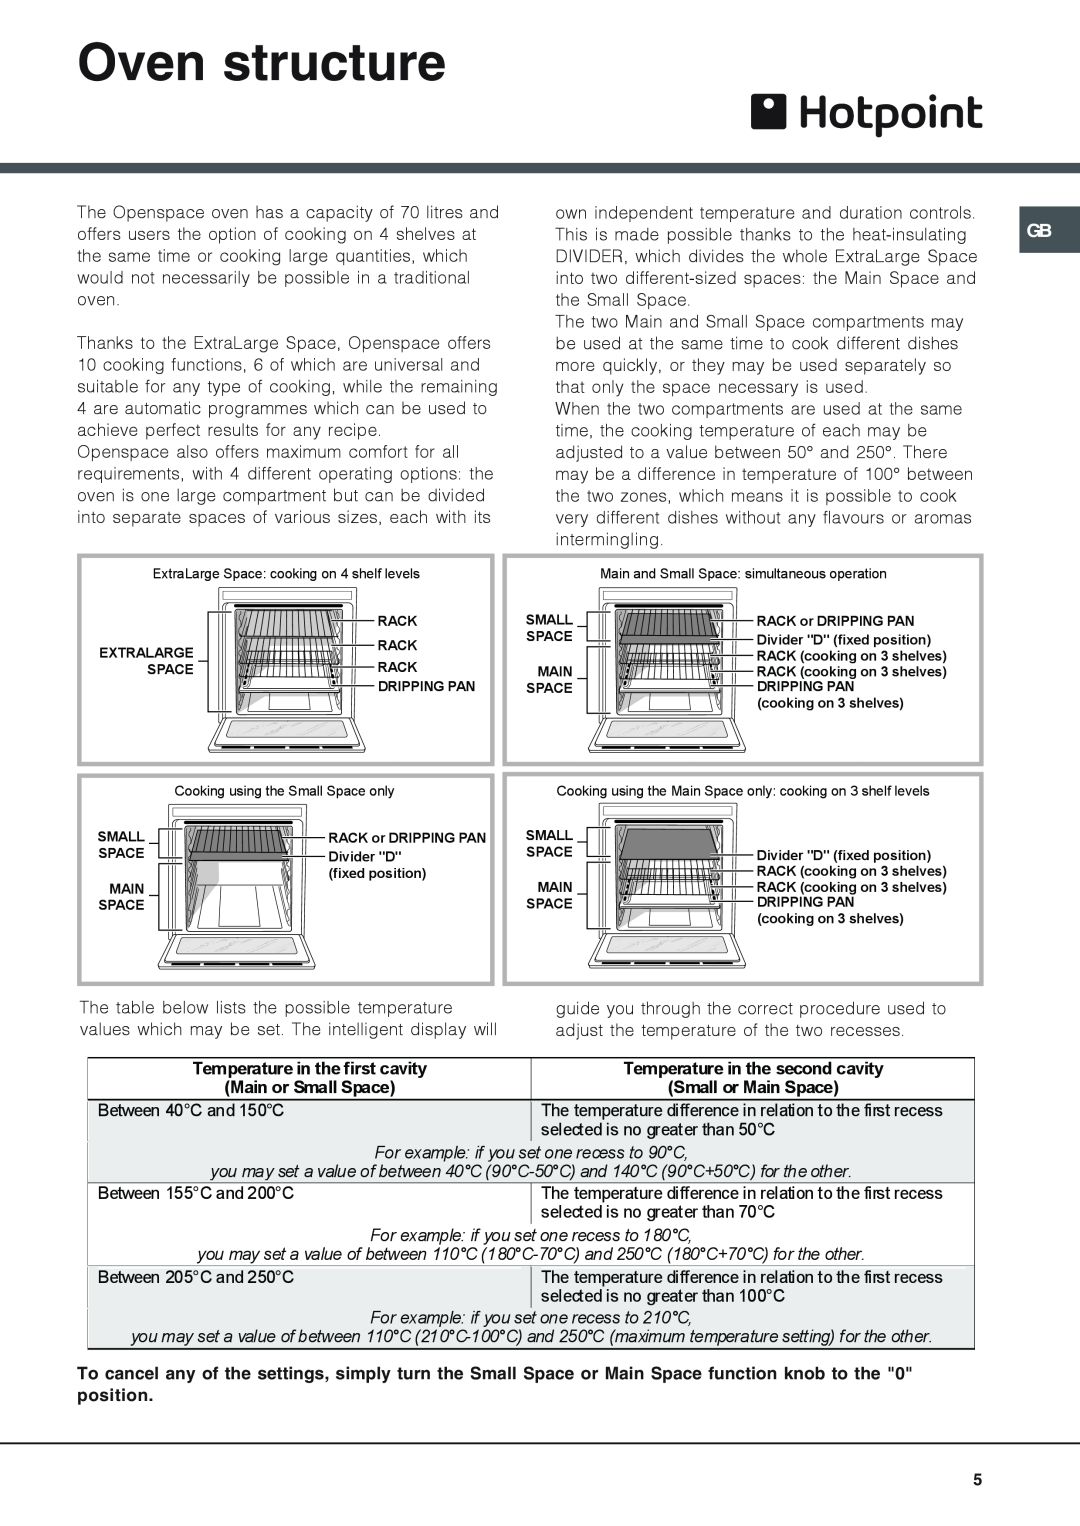 Hotpoint OS 897D P IX/HP, OS 897D P/HP Oven structure, Temperature in the first cavity, Temperature in the second cavity 